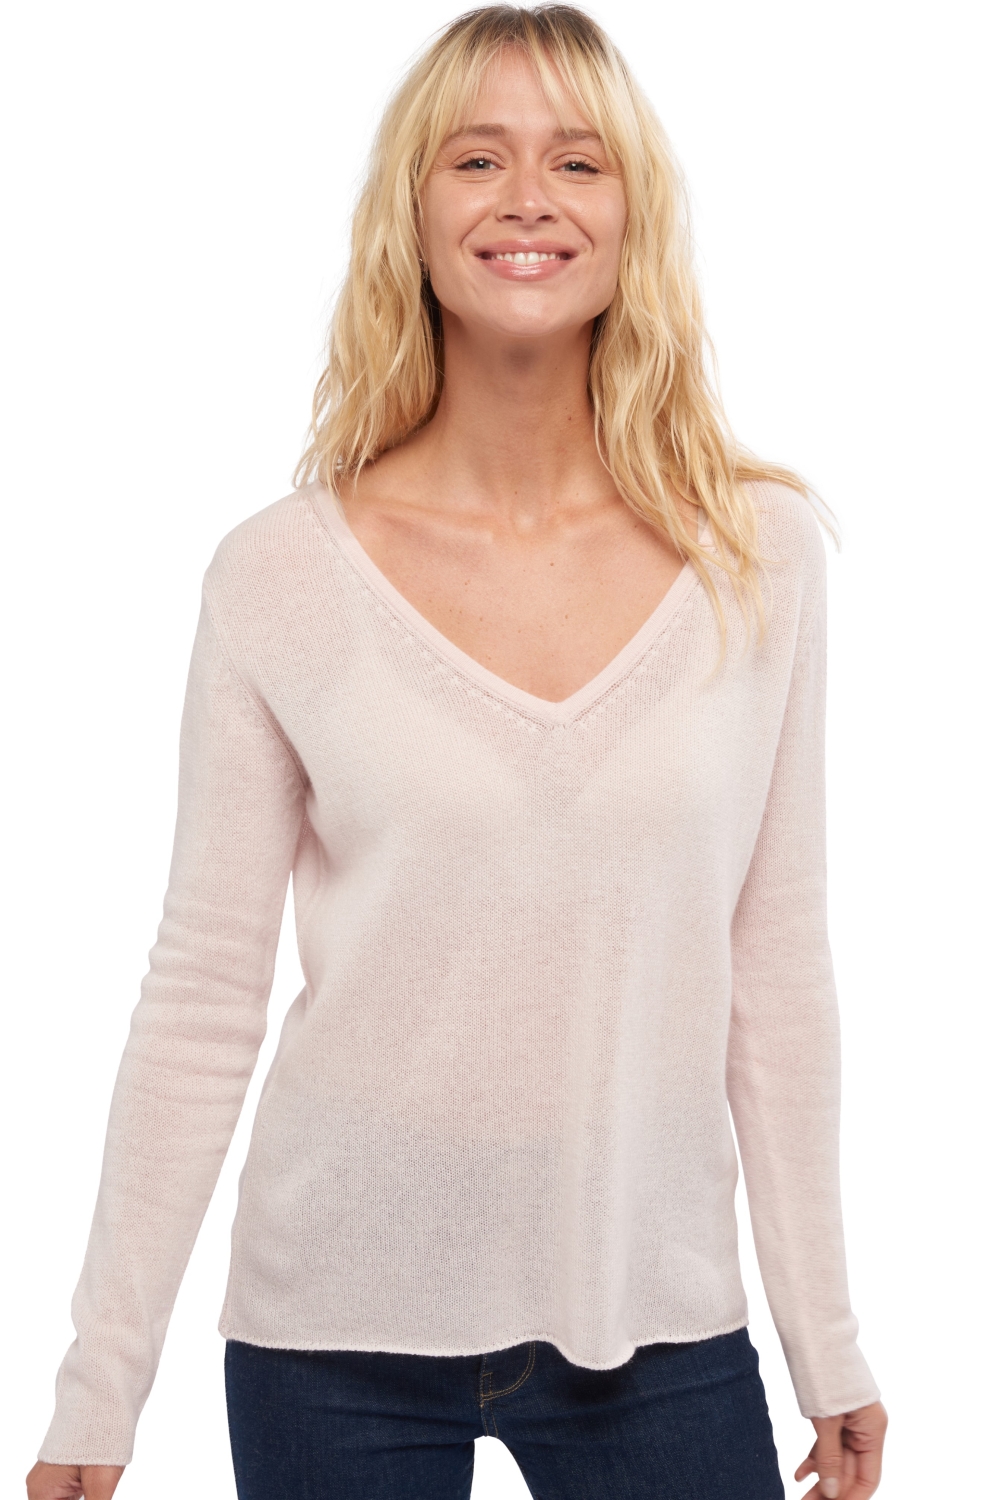 Cashmere ladies basic sweaters at low prices flavie shinking violet xl